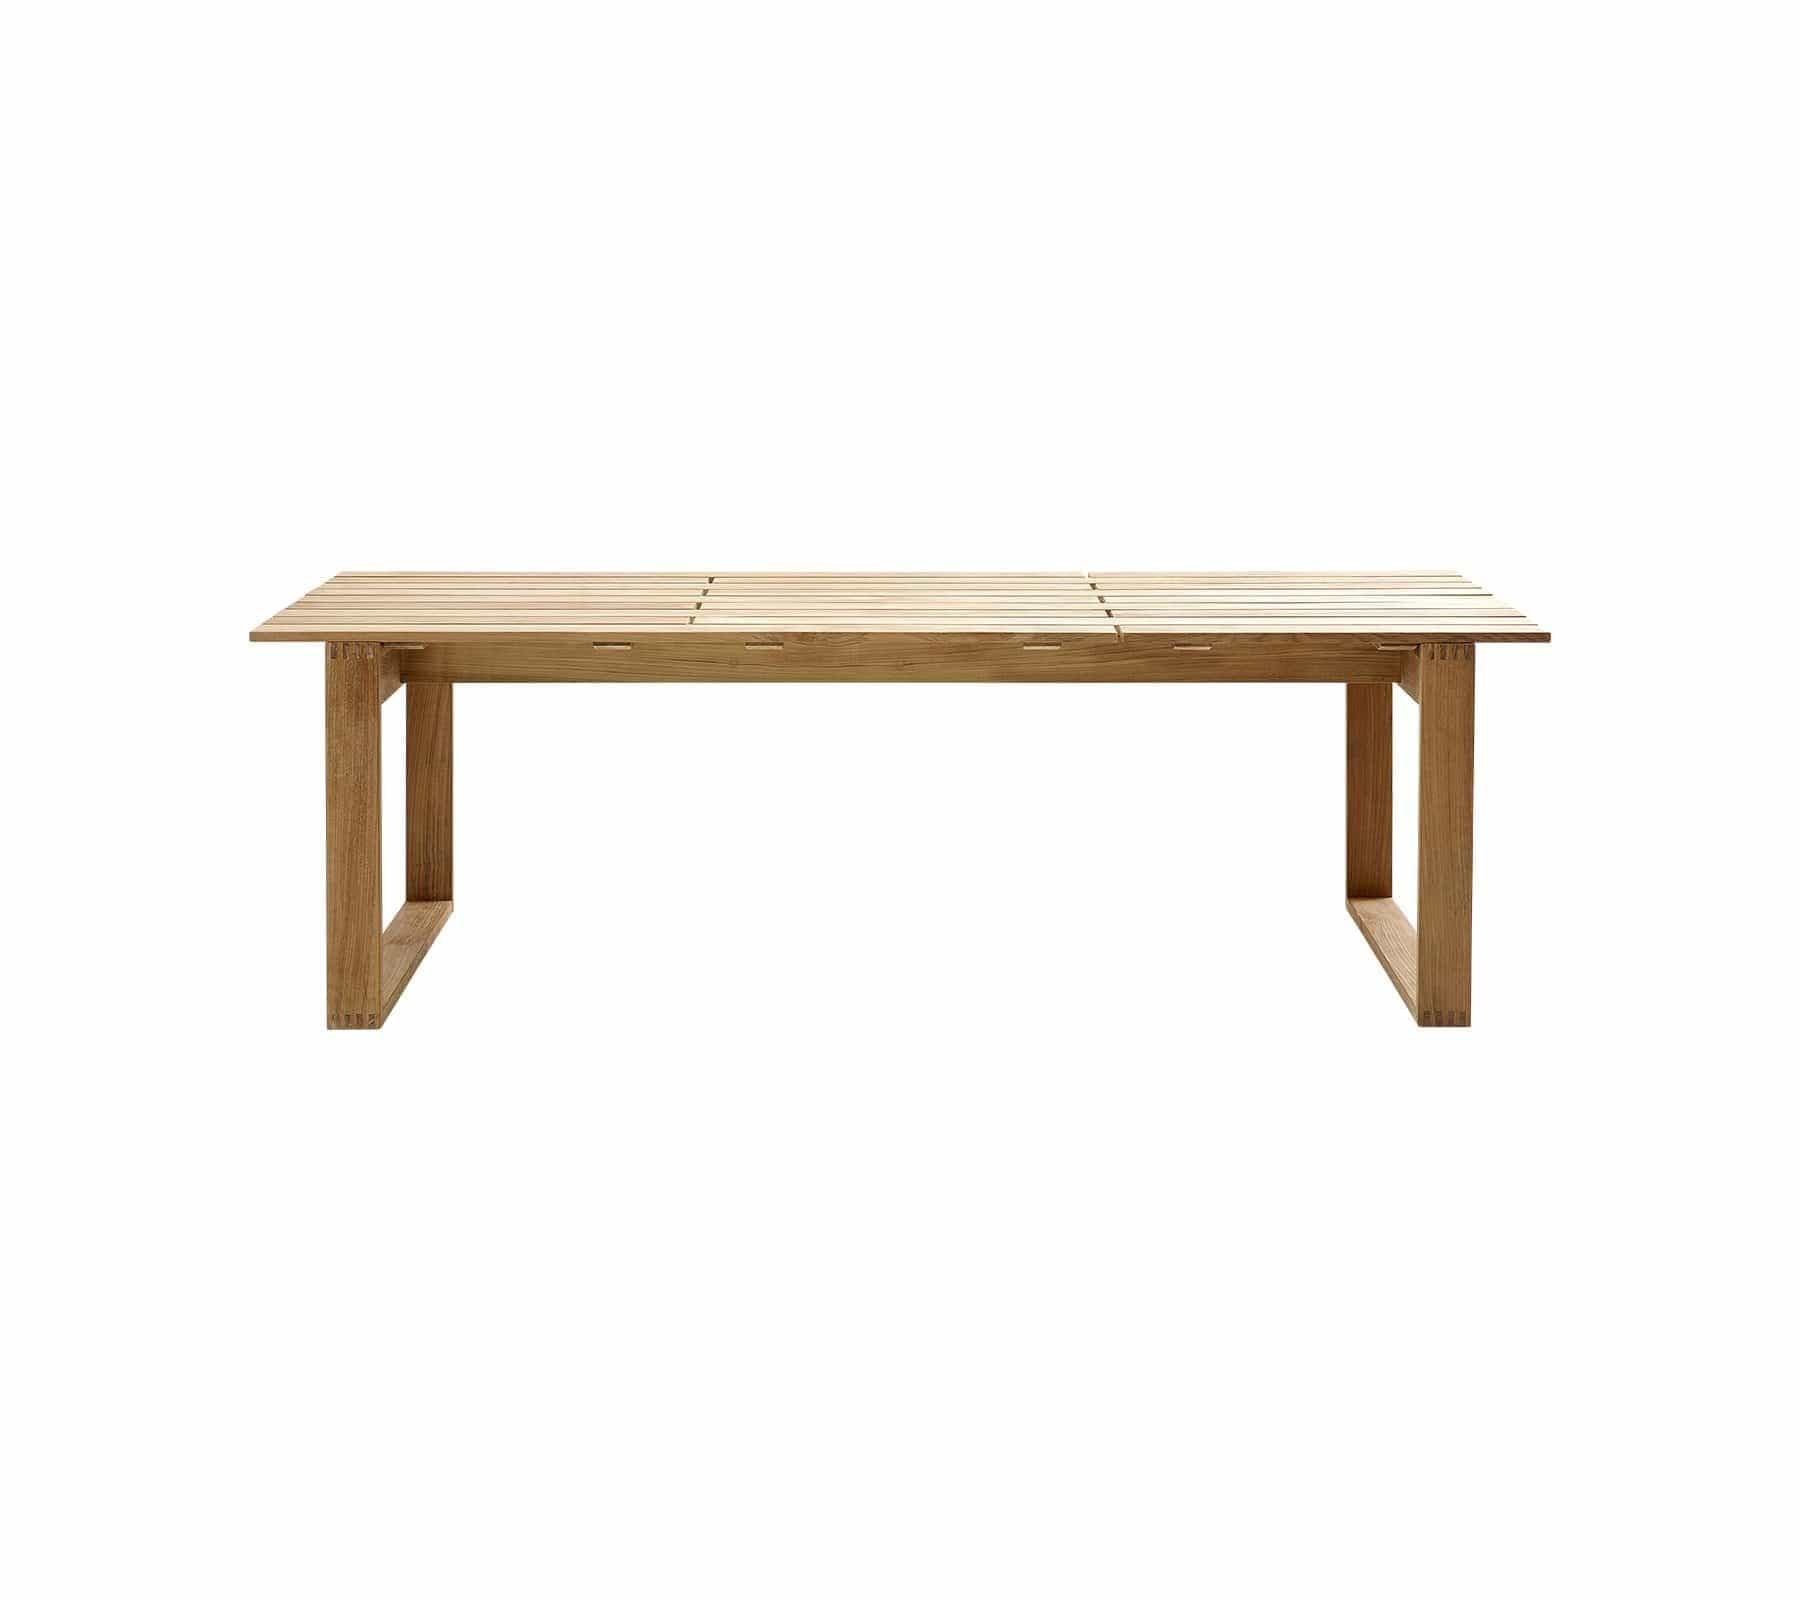 Boxhill's Endless Outdoor Rectangular Dining Table Small, center view in white background